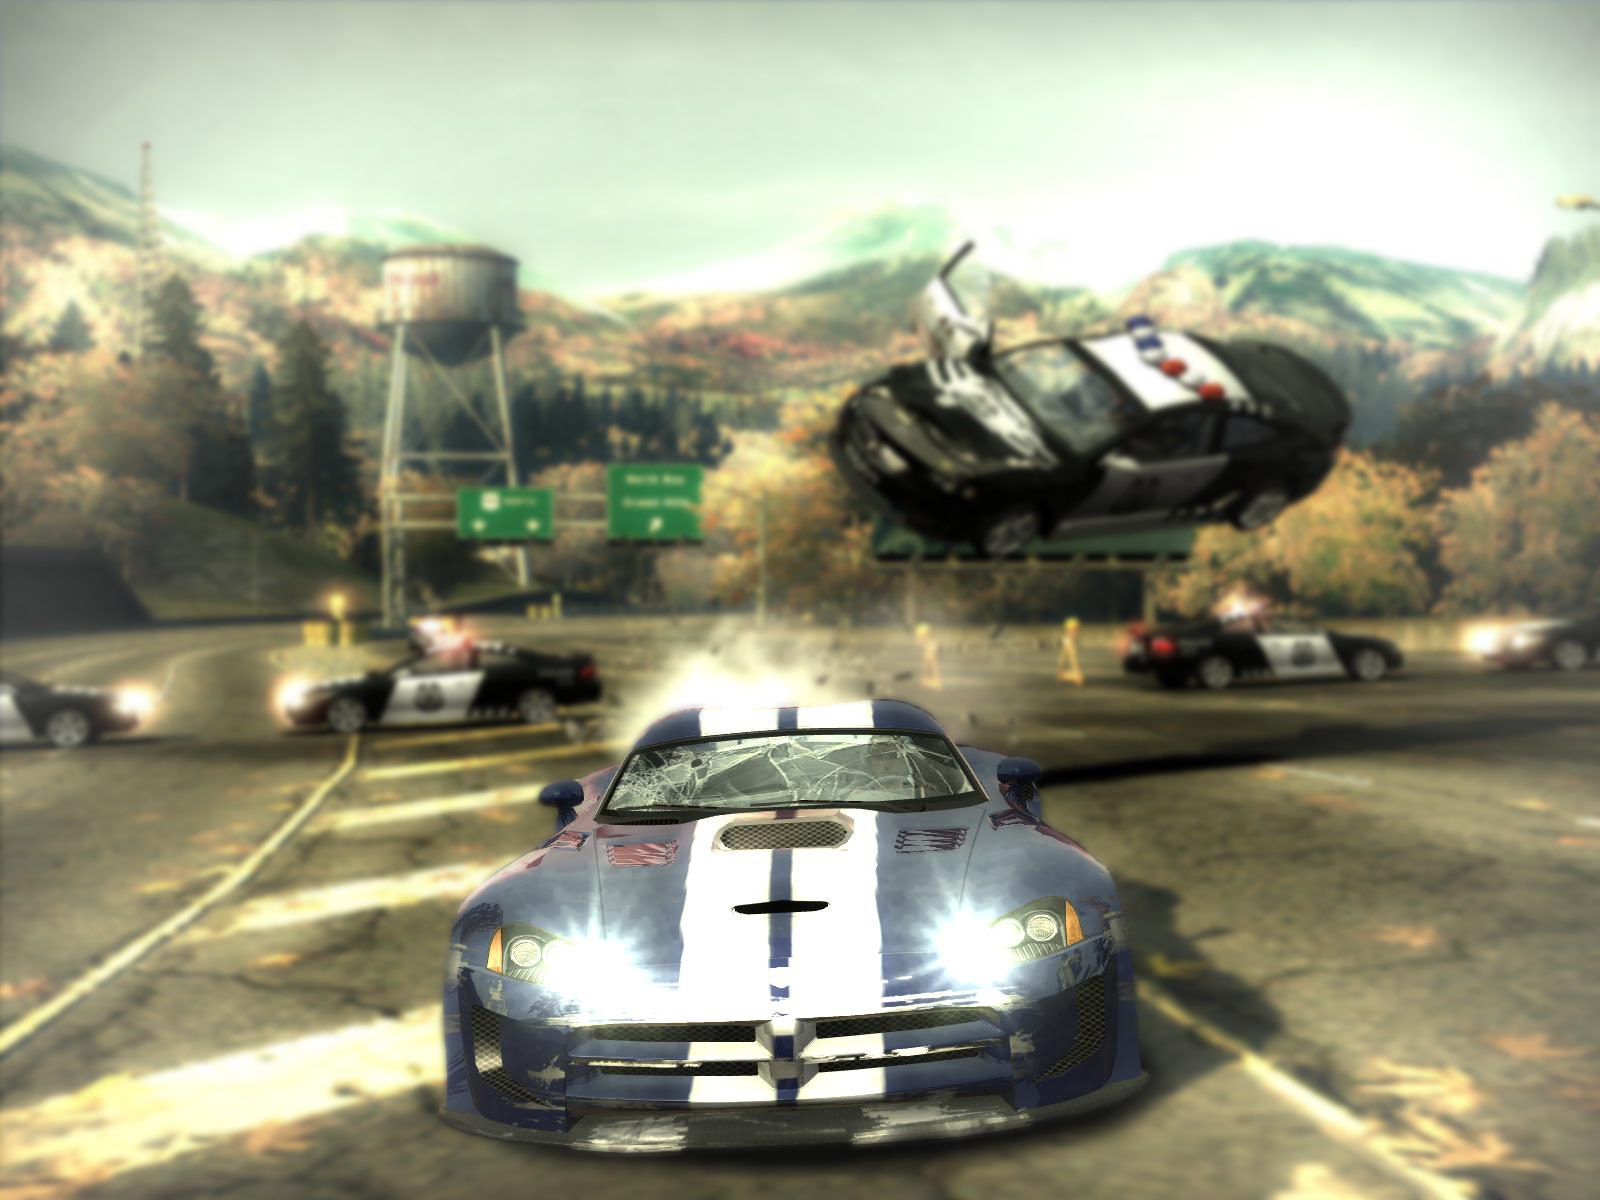  Wallpaper  Desktop on Video Games Cars Need For Speed Most Wanted Hd Wallpaper   Games